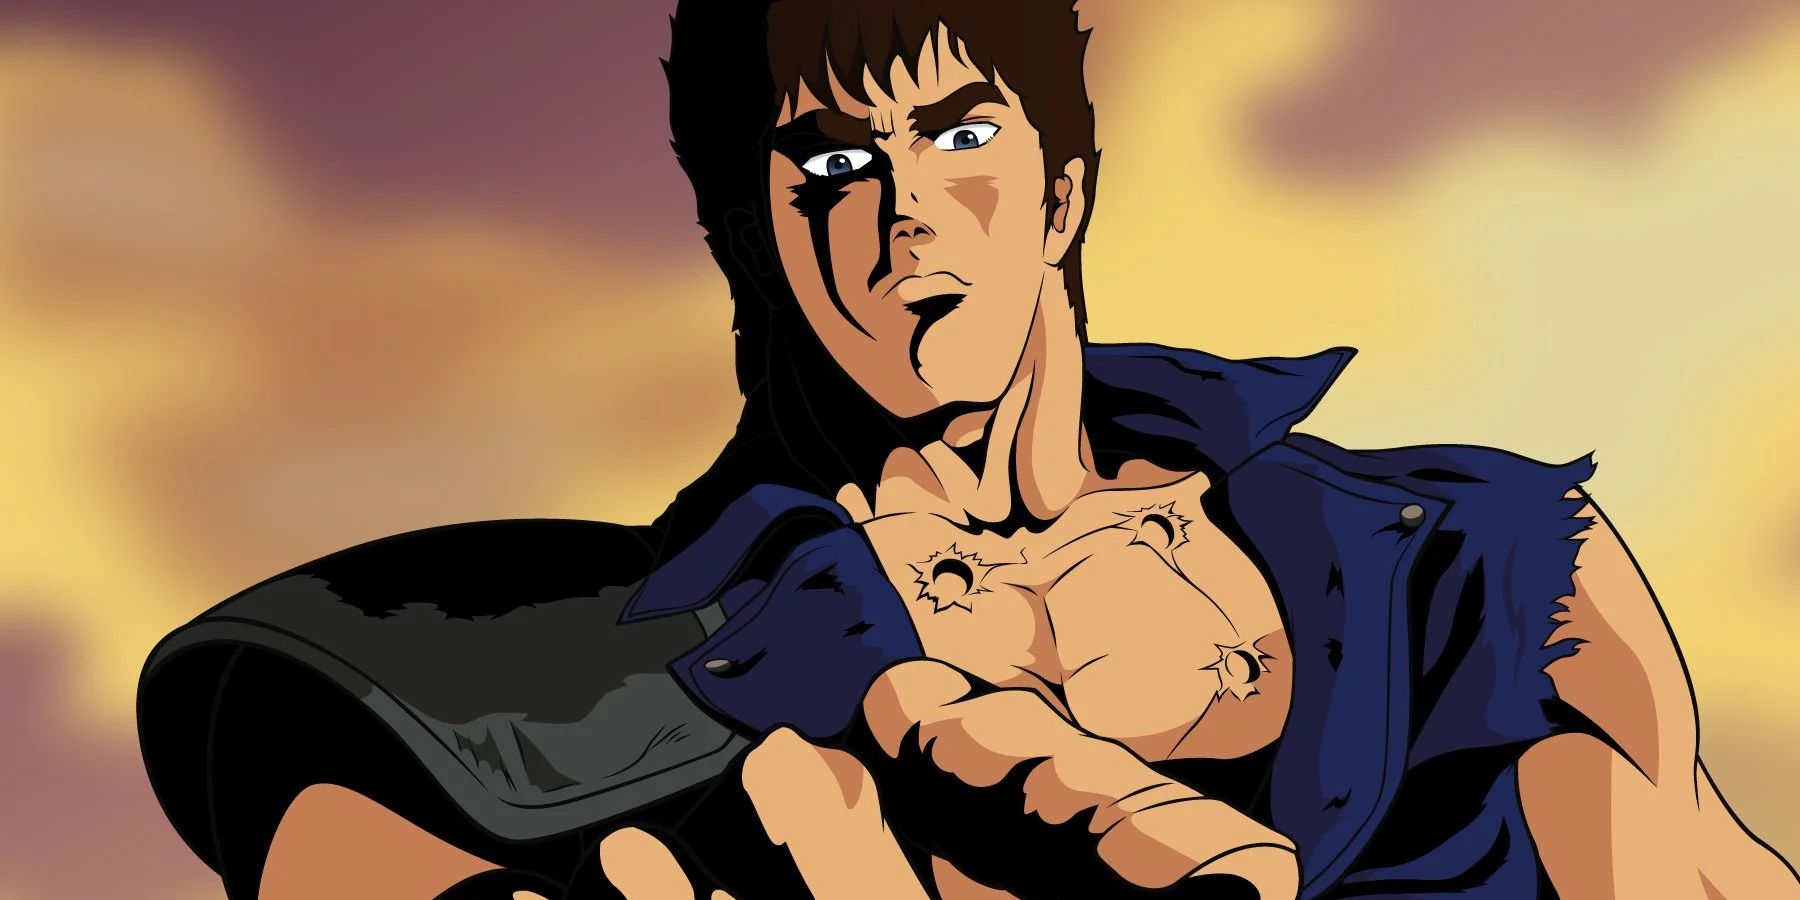 Kenshiro of Fist of the North Star